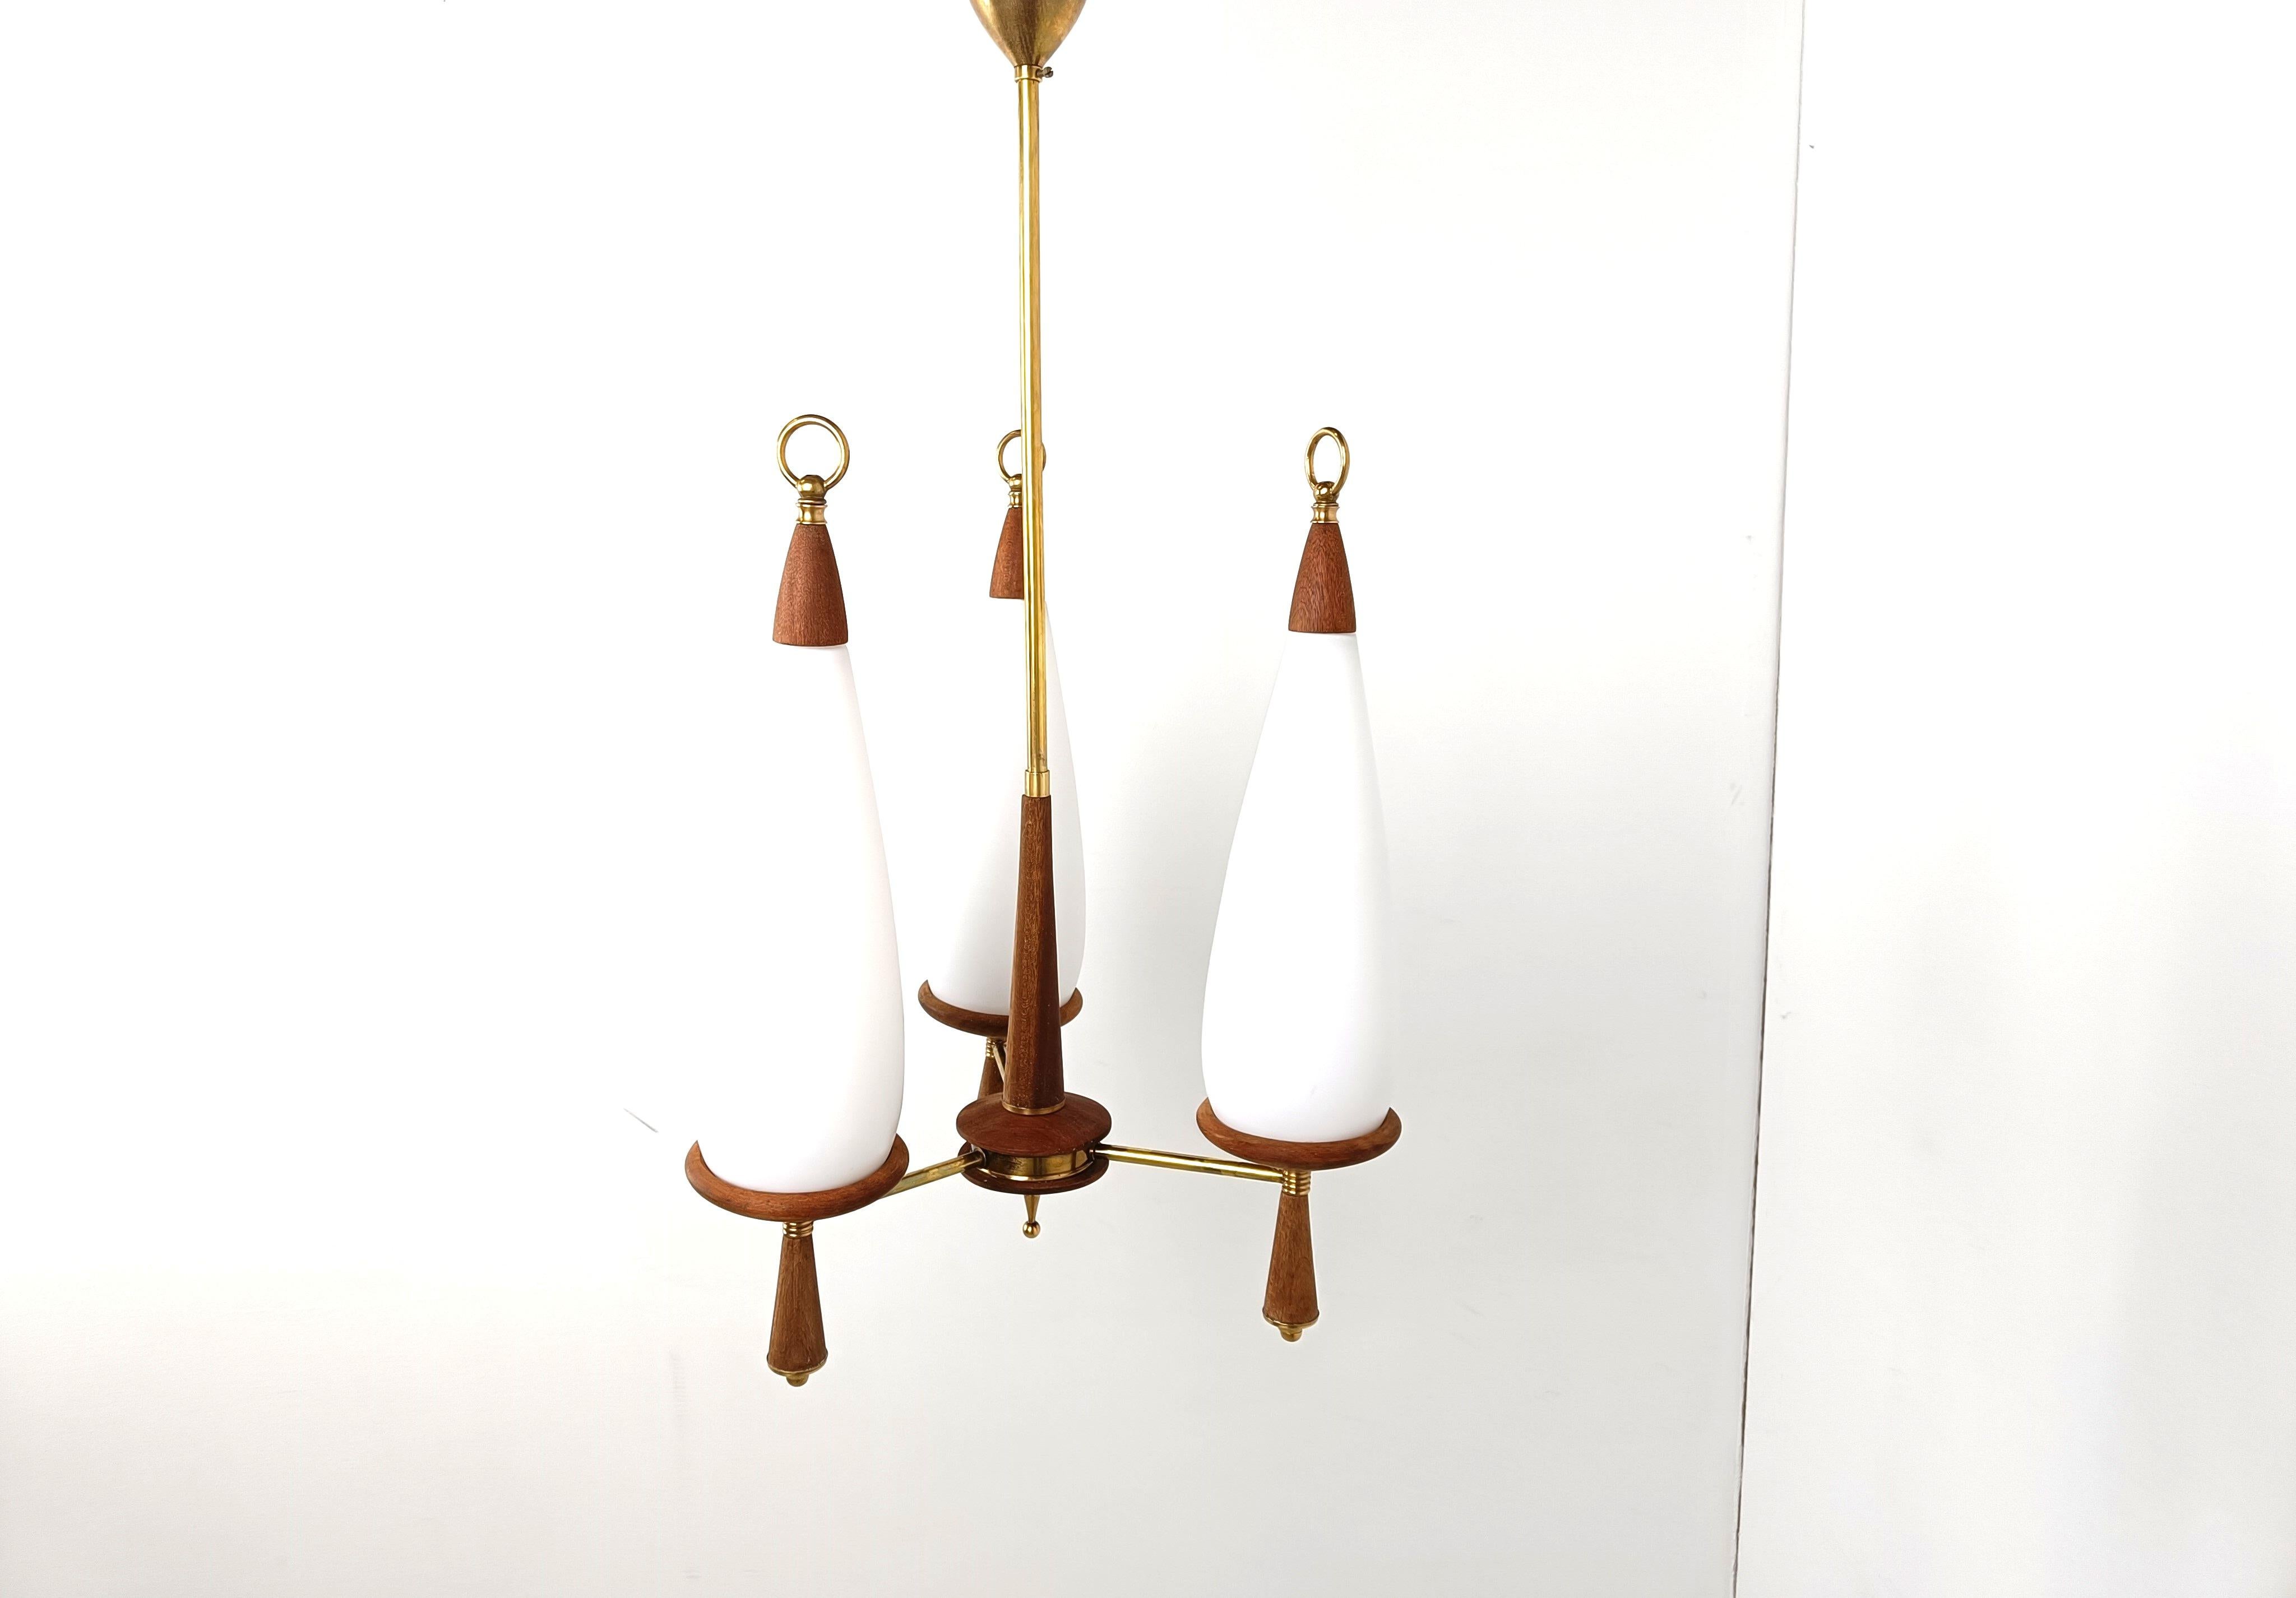 Mid century scandinavian chandelier made of teak with  teardrop shaped milk glass shades.

The teak chandelier is in perfect condition and has the original brass ceiling canopy.

It creates a warm and charming atmosphere.

Tested and ready for